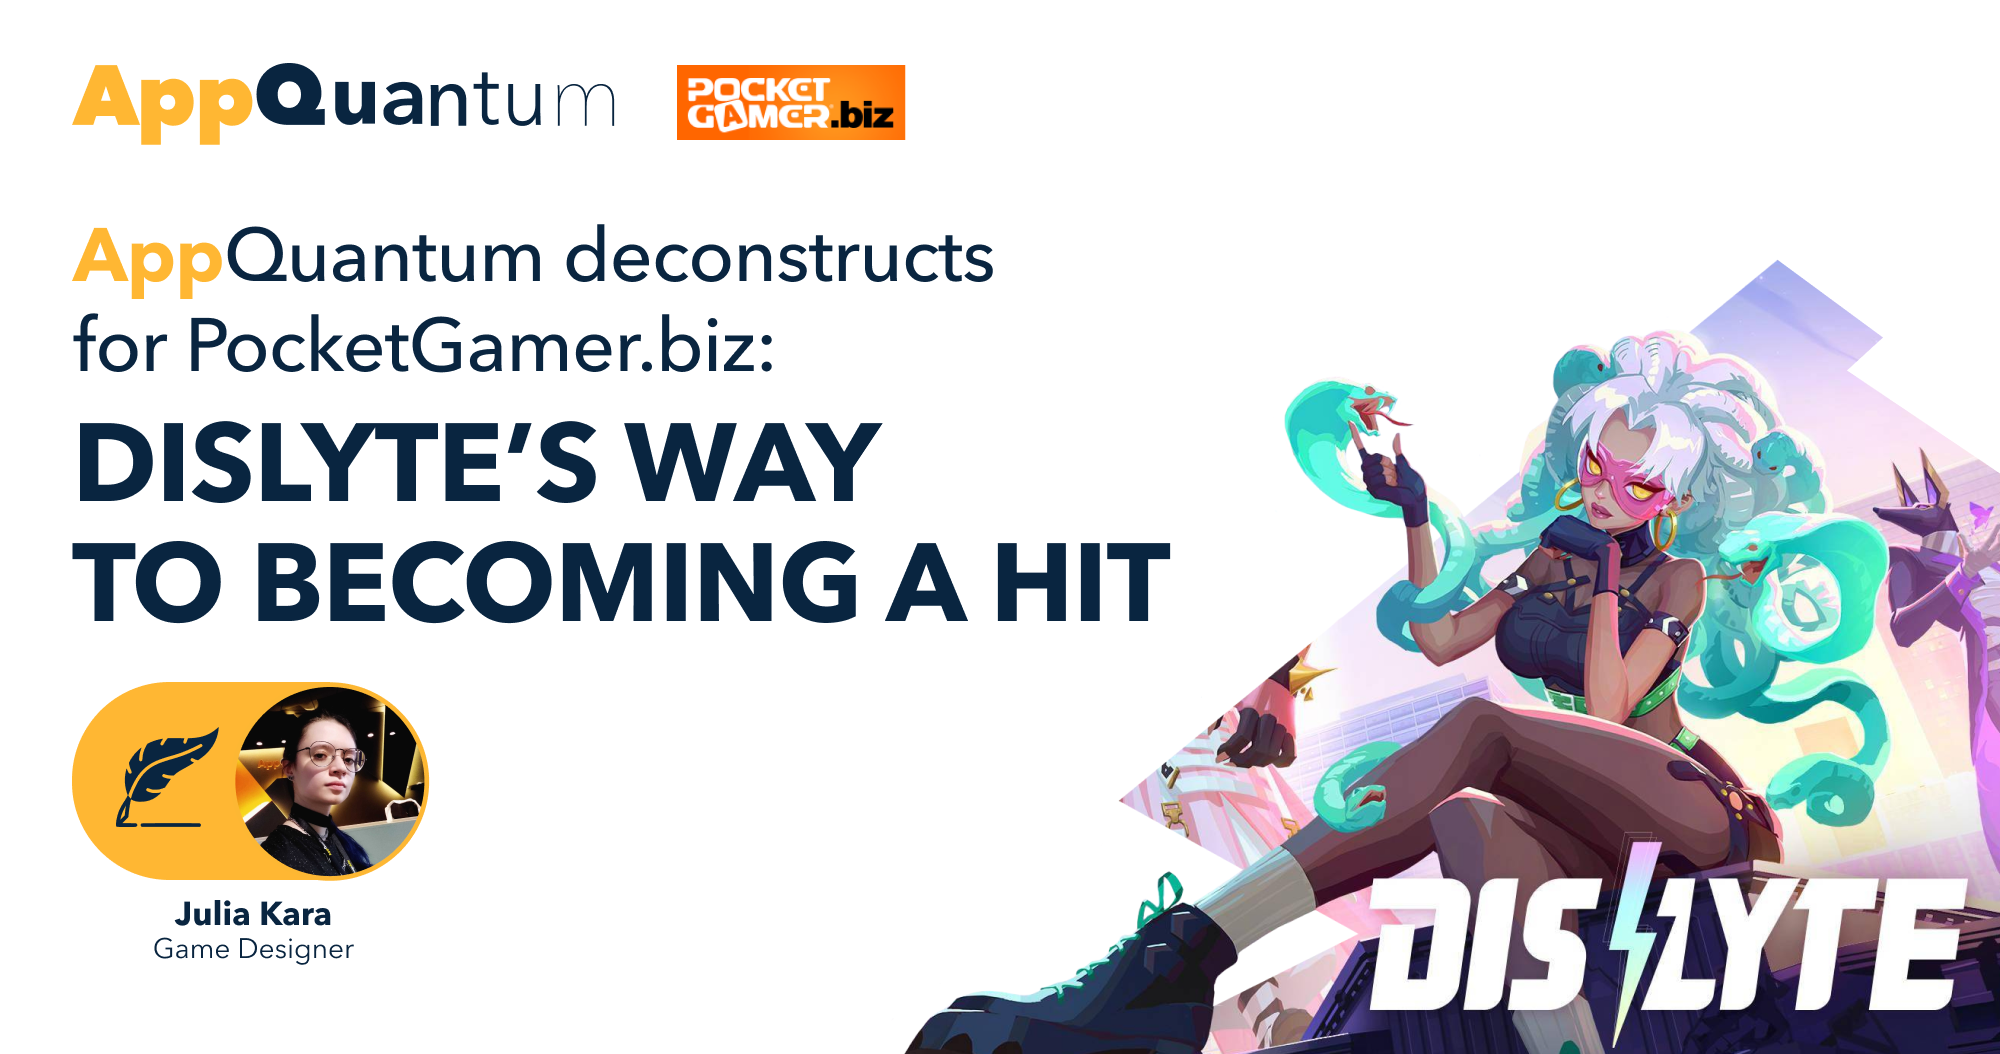 AppQuantum Deconstructs for PocketGamer.biz: Dislyte’s Way to Becoming a Hit